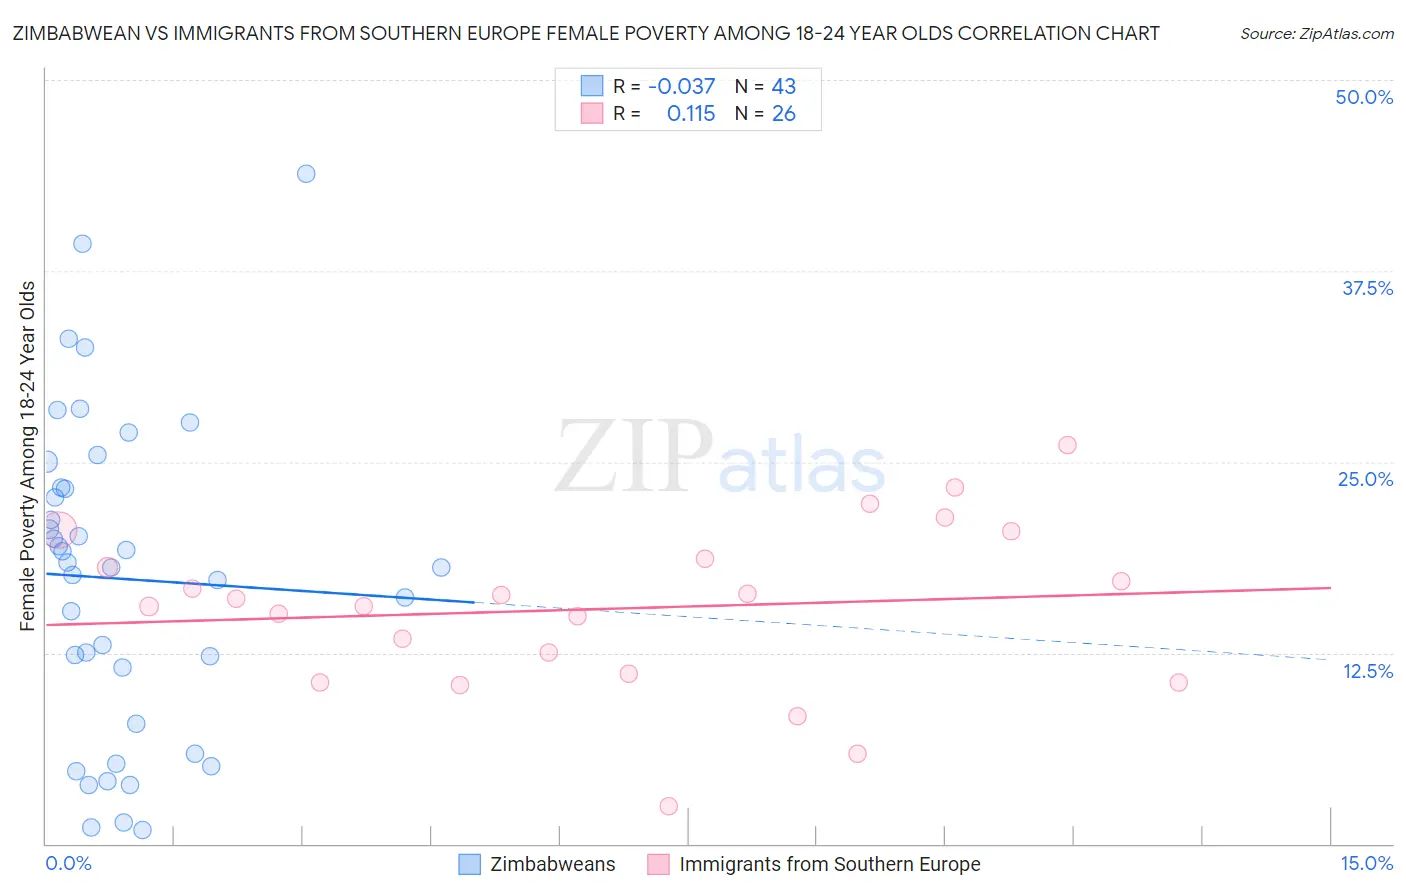 Zimbabwean vs Immigrants from Southern Europe Female Poverty Among 18-24 Year Olds